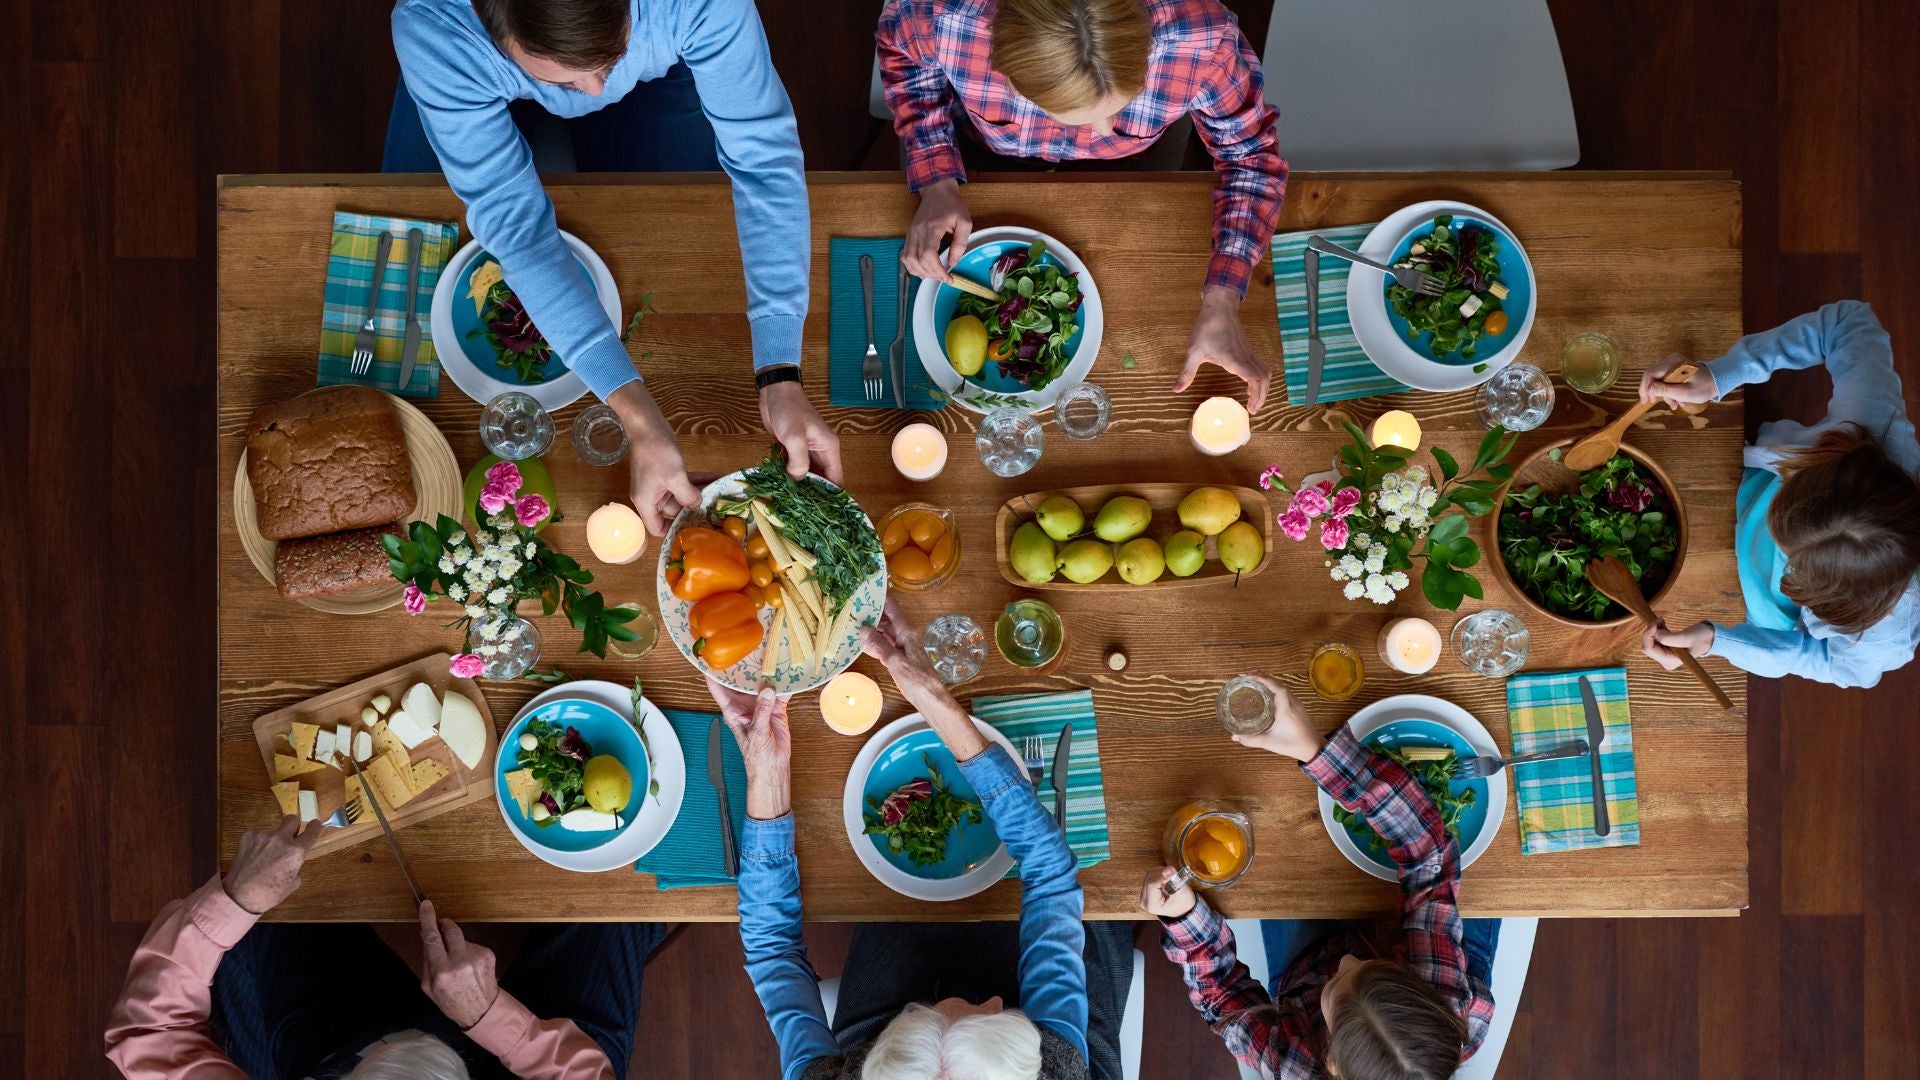 A birds eye shot of a family eating and passing food around the dining table